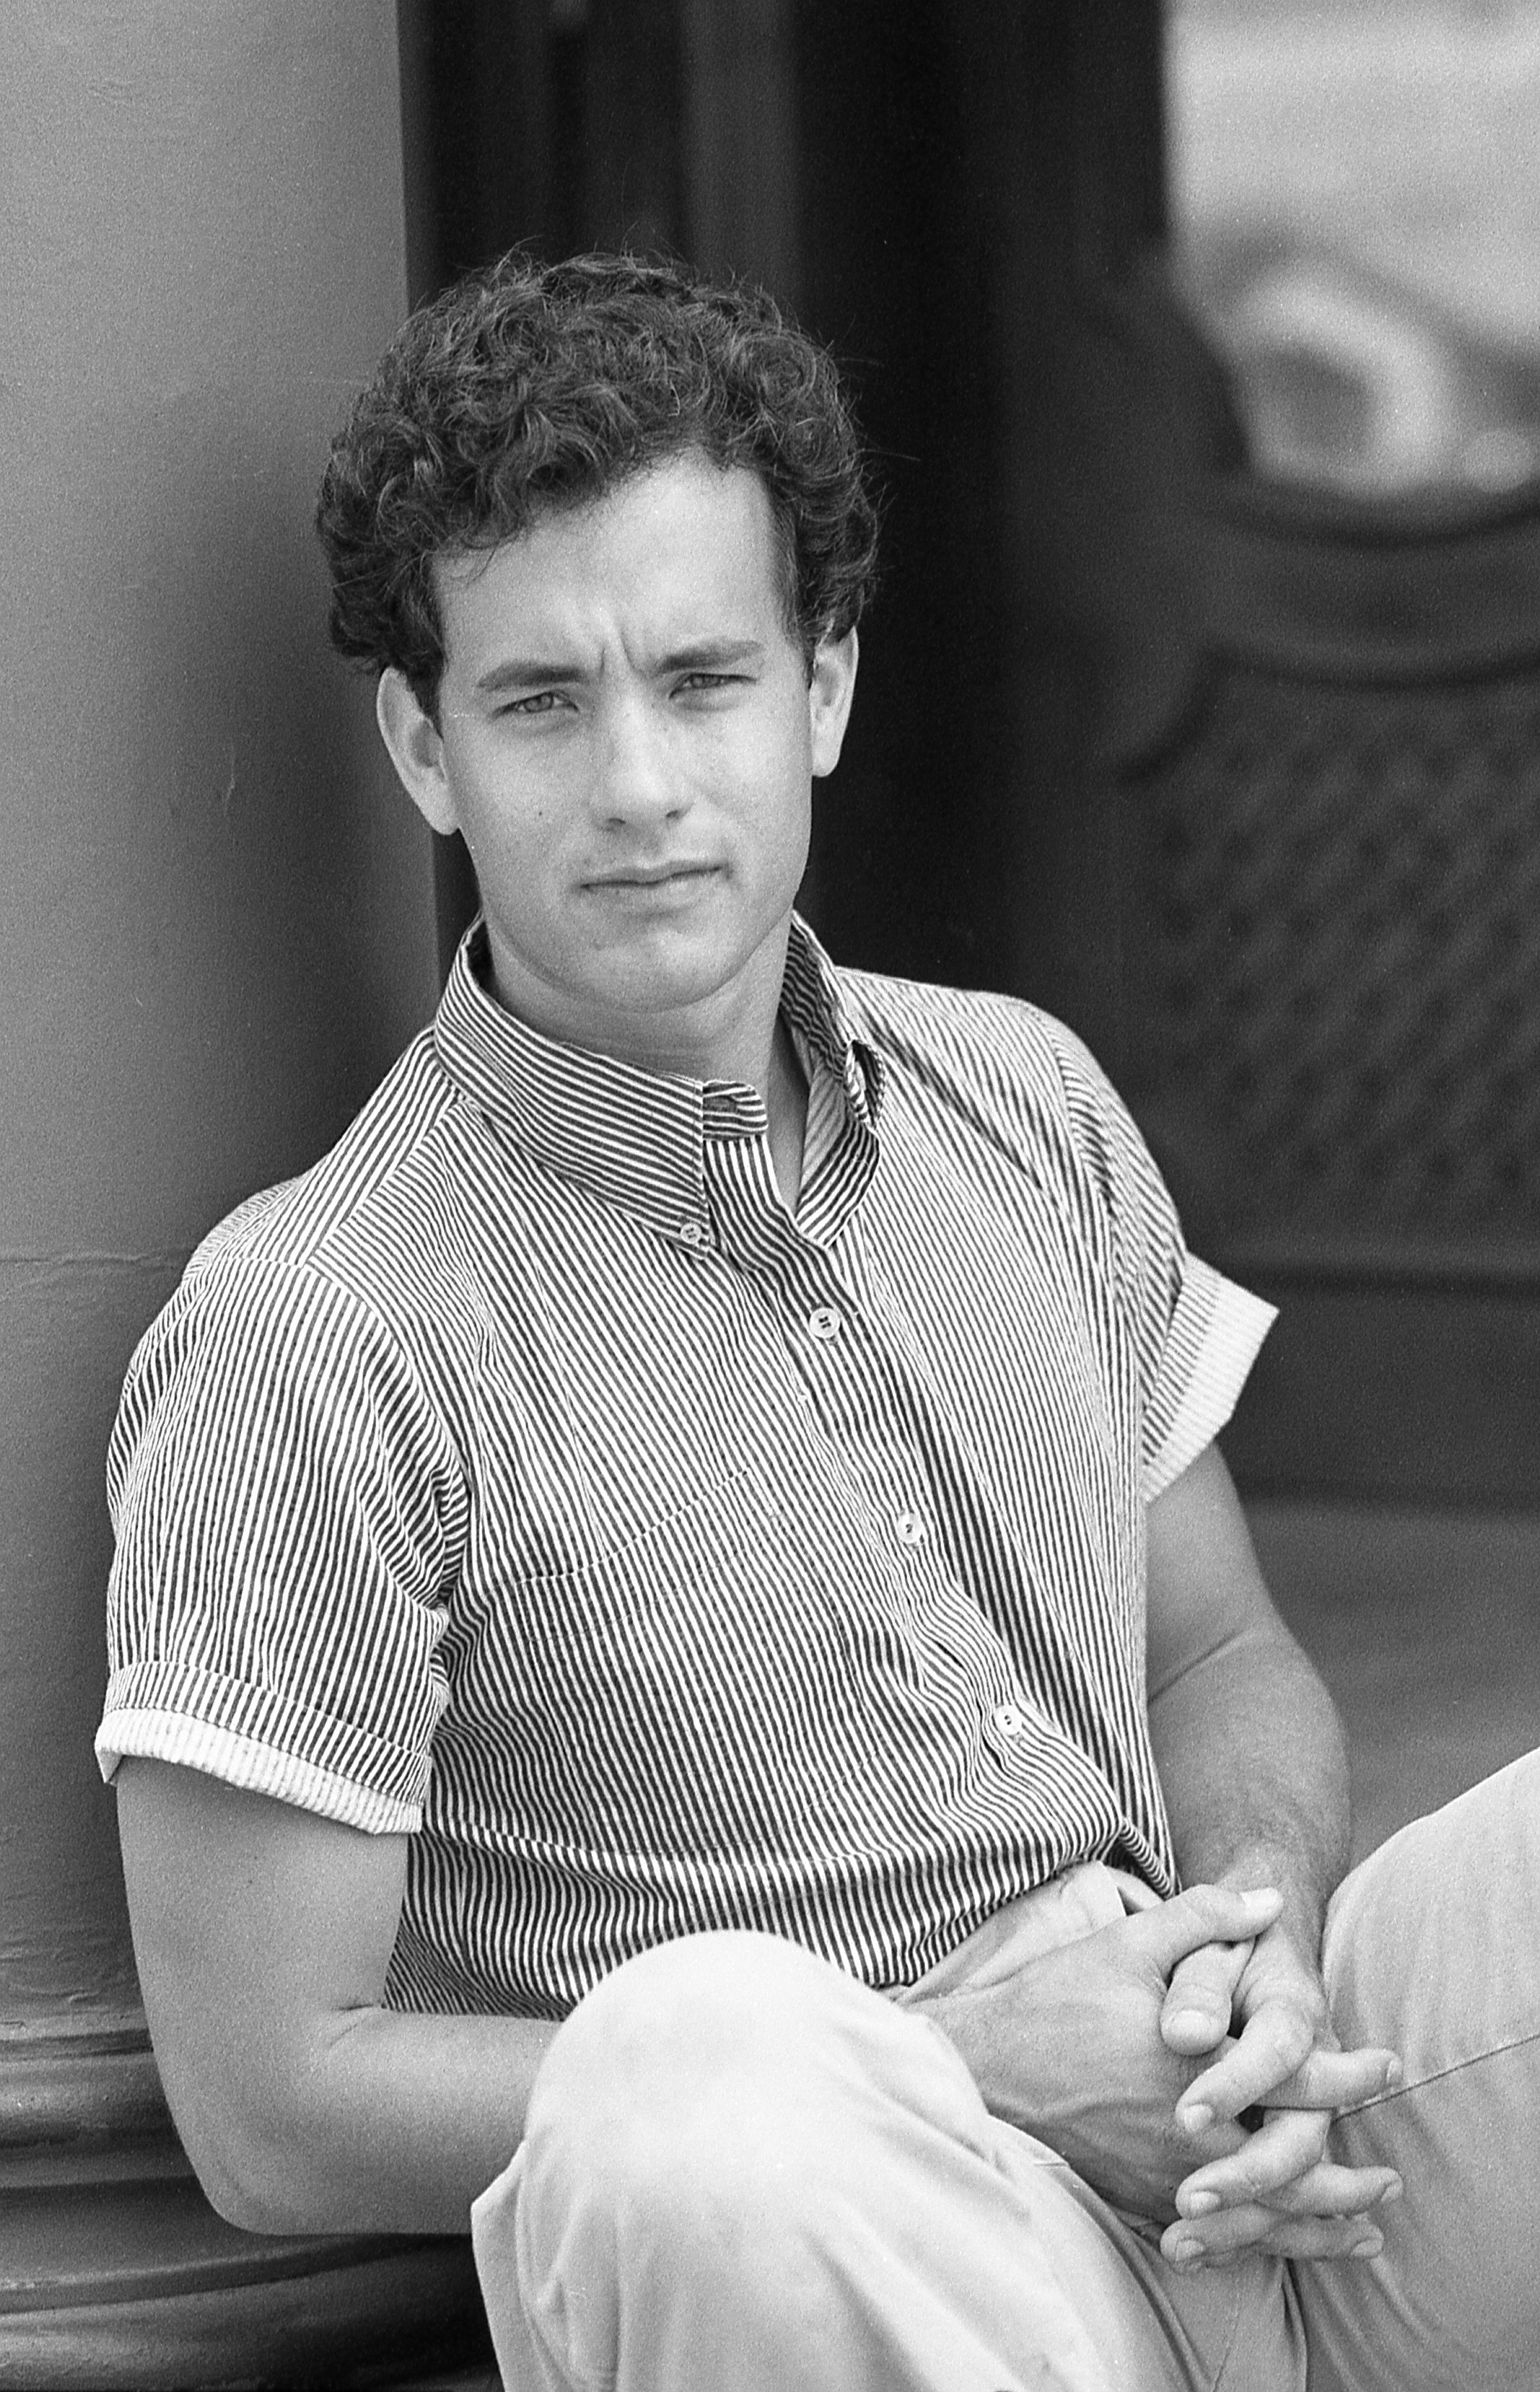 Tom Hanks poses during the filming of the movie "Bachelor Party" on the backlot of 20th Century Fox Studio in 1984 in Century City, California ┃Source: Getty Images